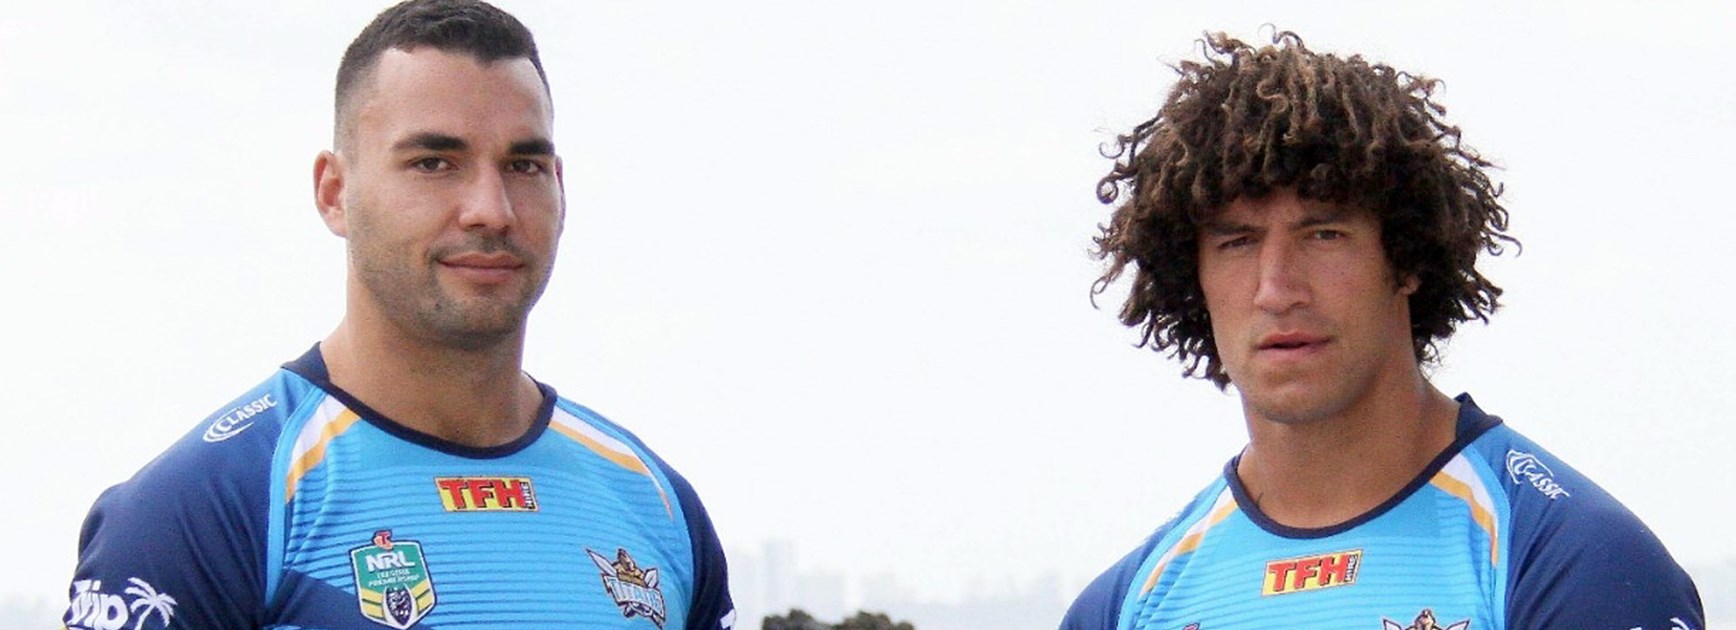 Ryan James and Kevin Procter have been named co-captains of the Titans in 2017.